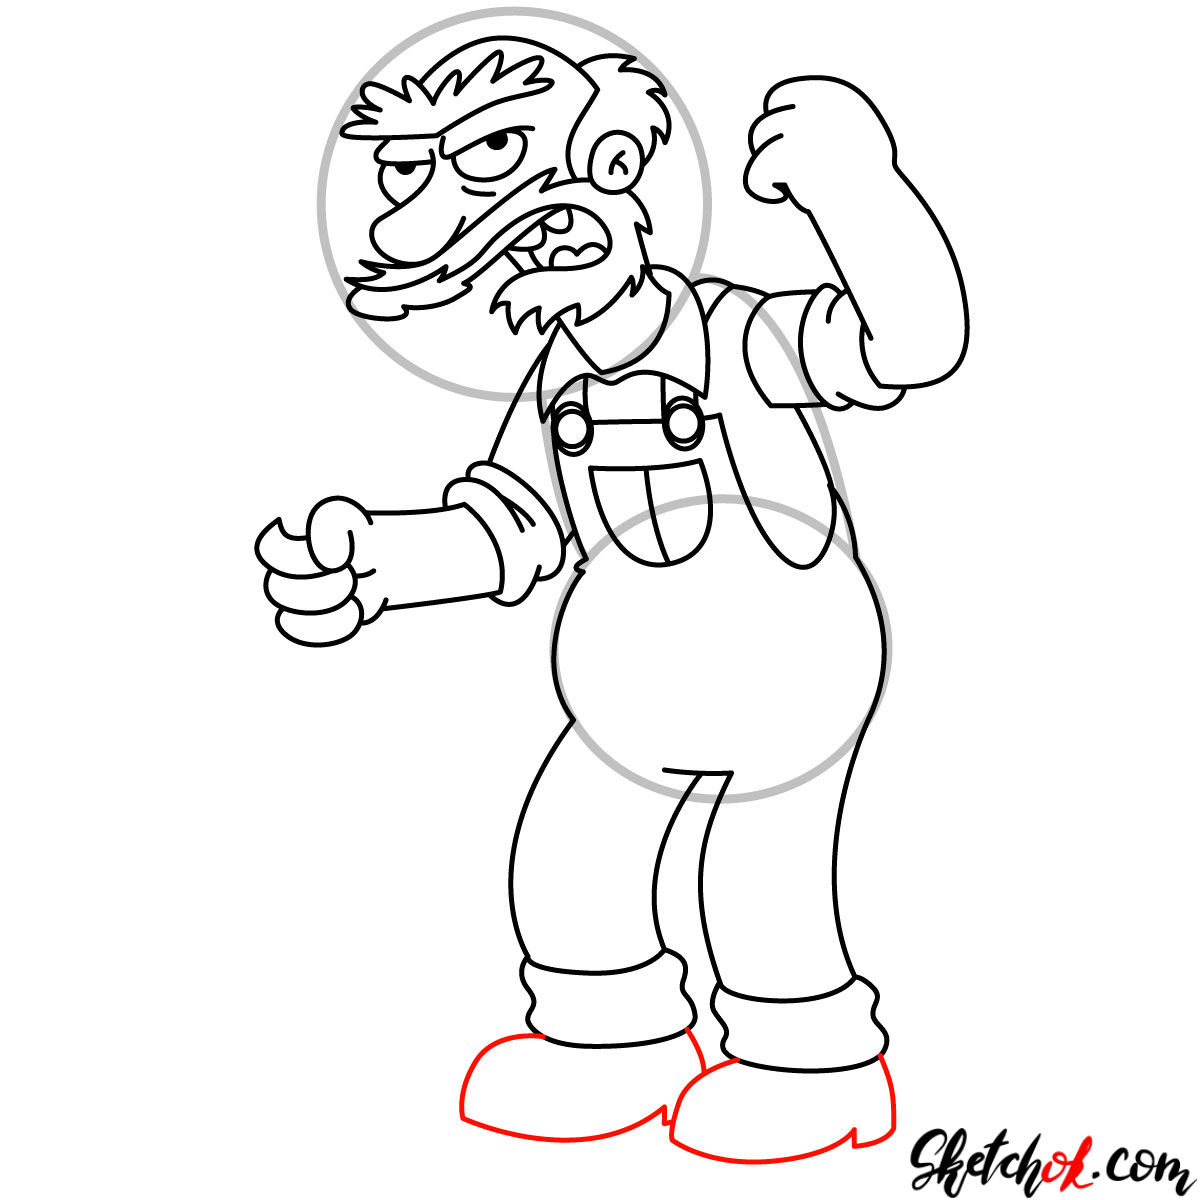 How to draw Groundskeeper Willie with a shovel - step 13